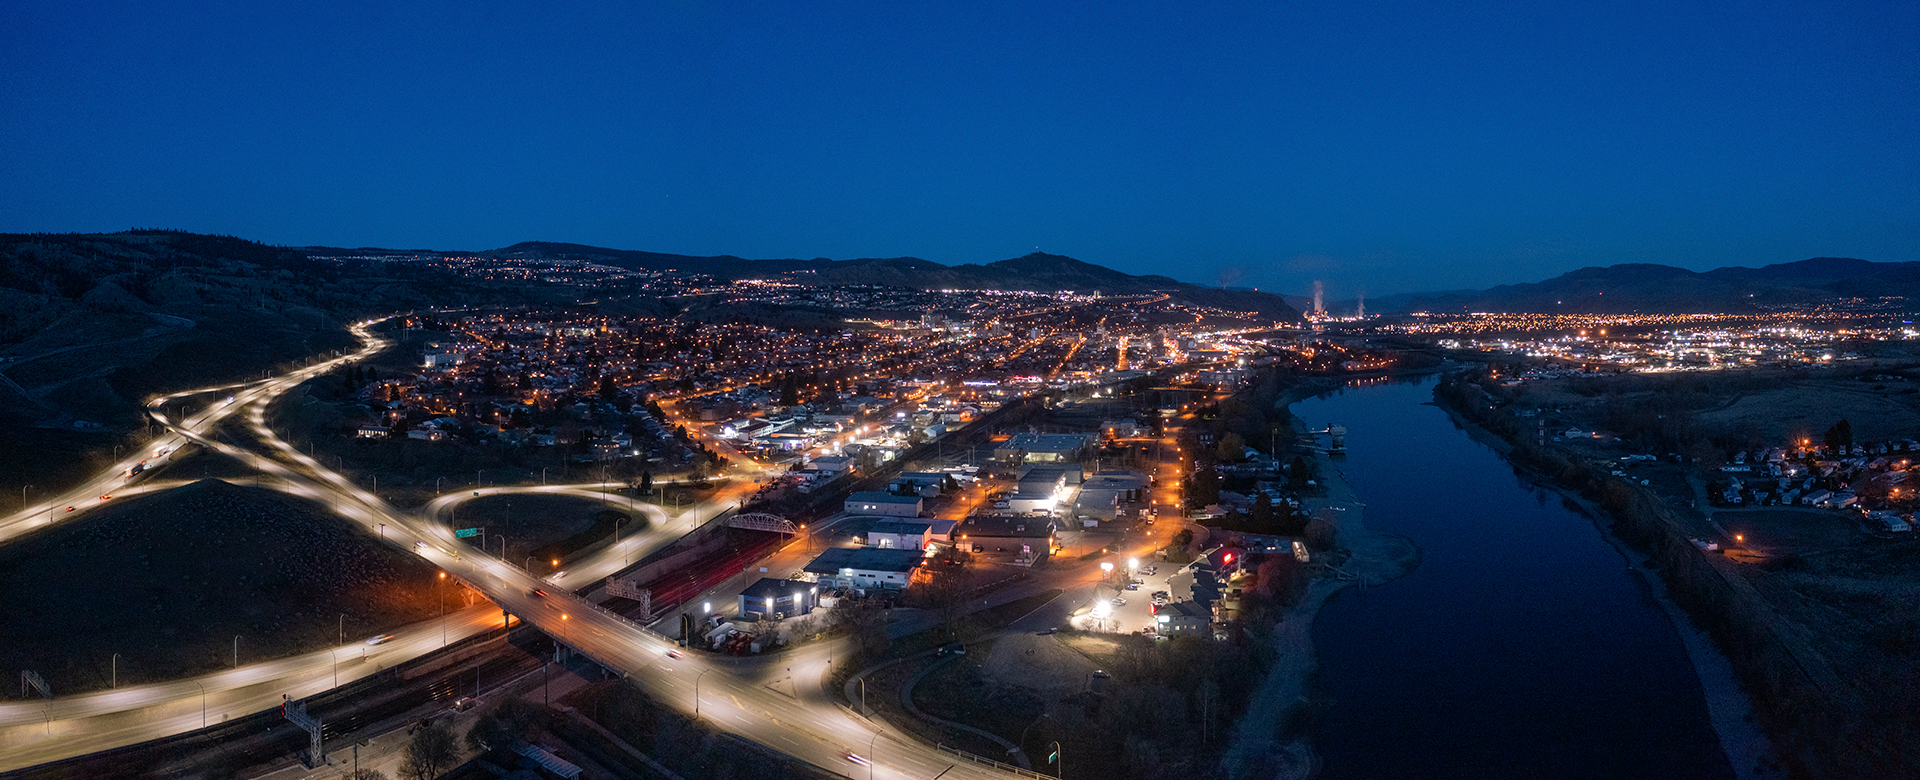 Kamloops City Aerial nighttime view with lights and road